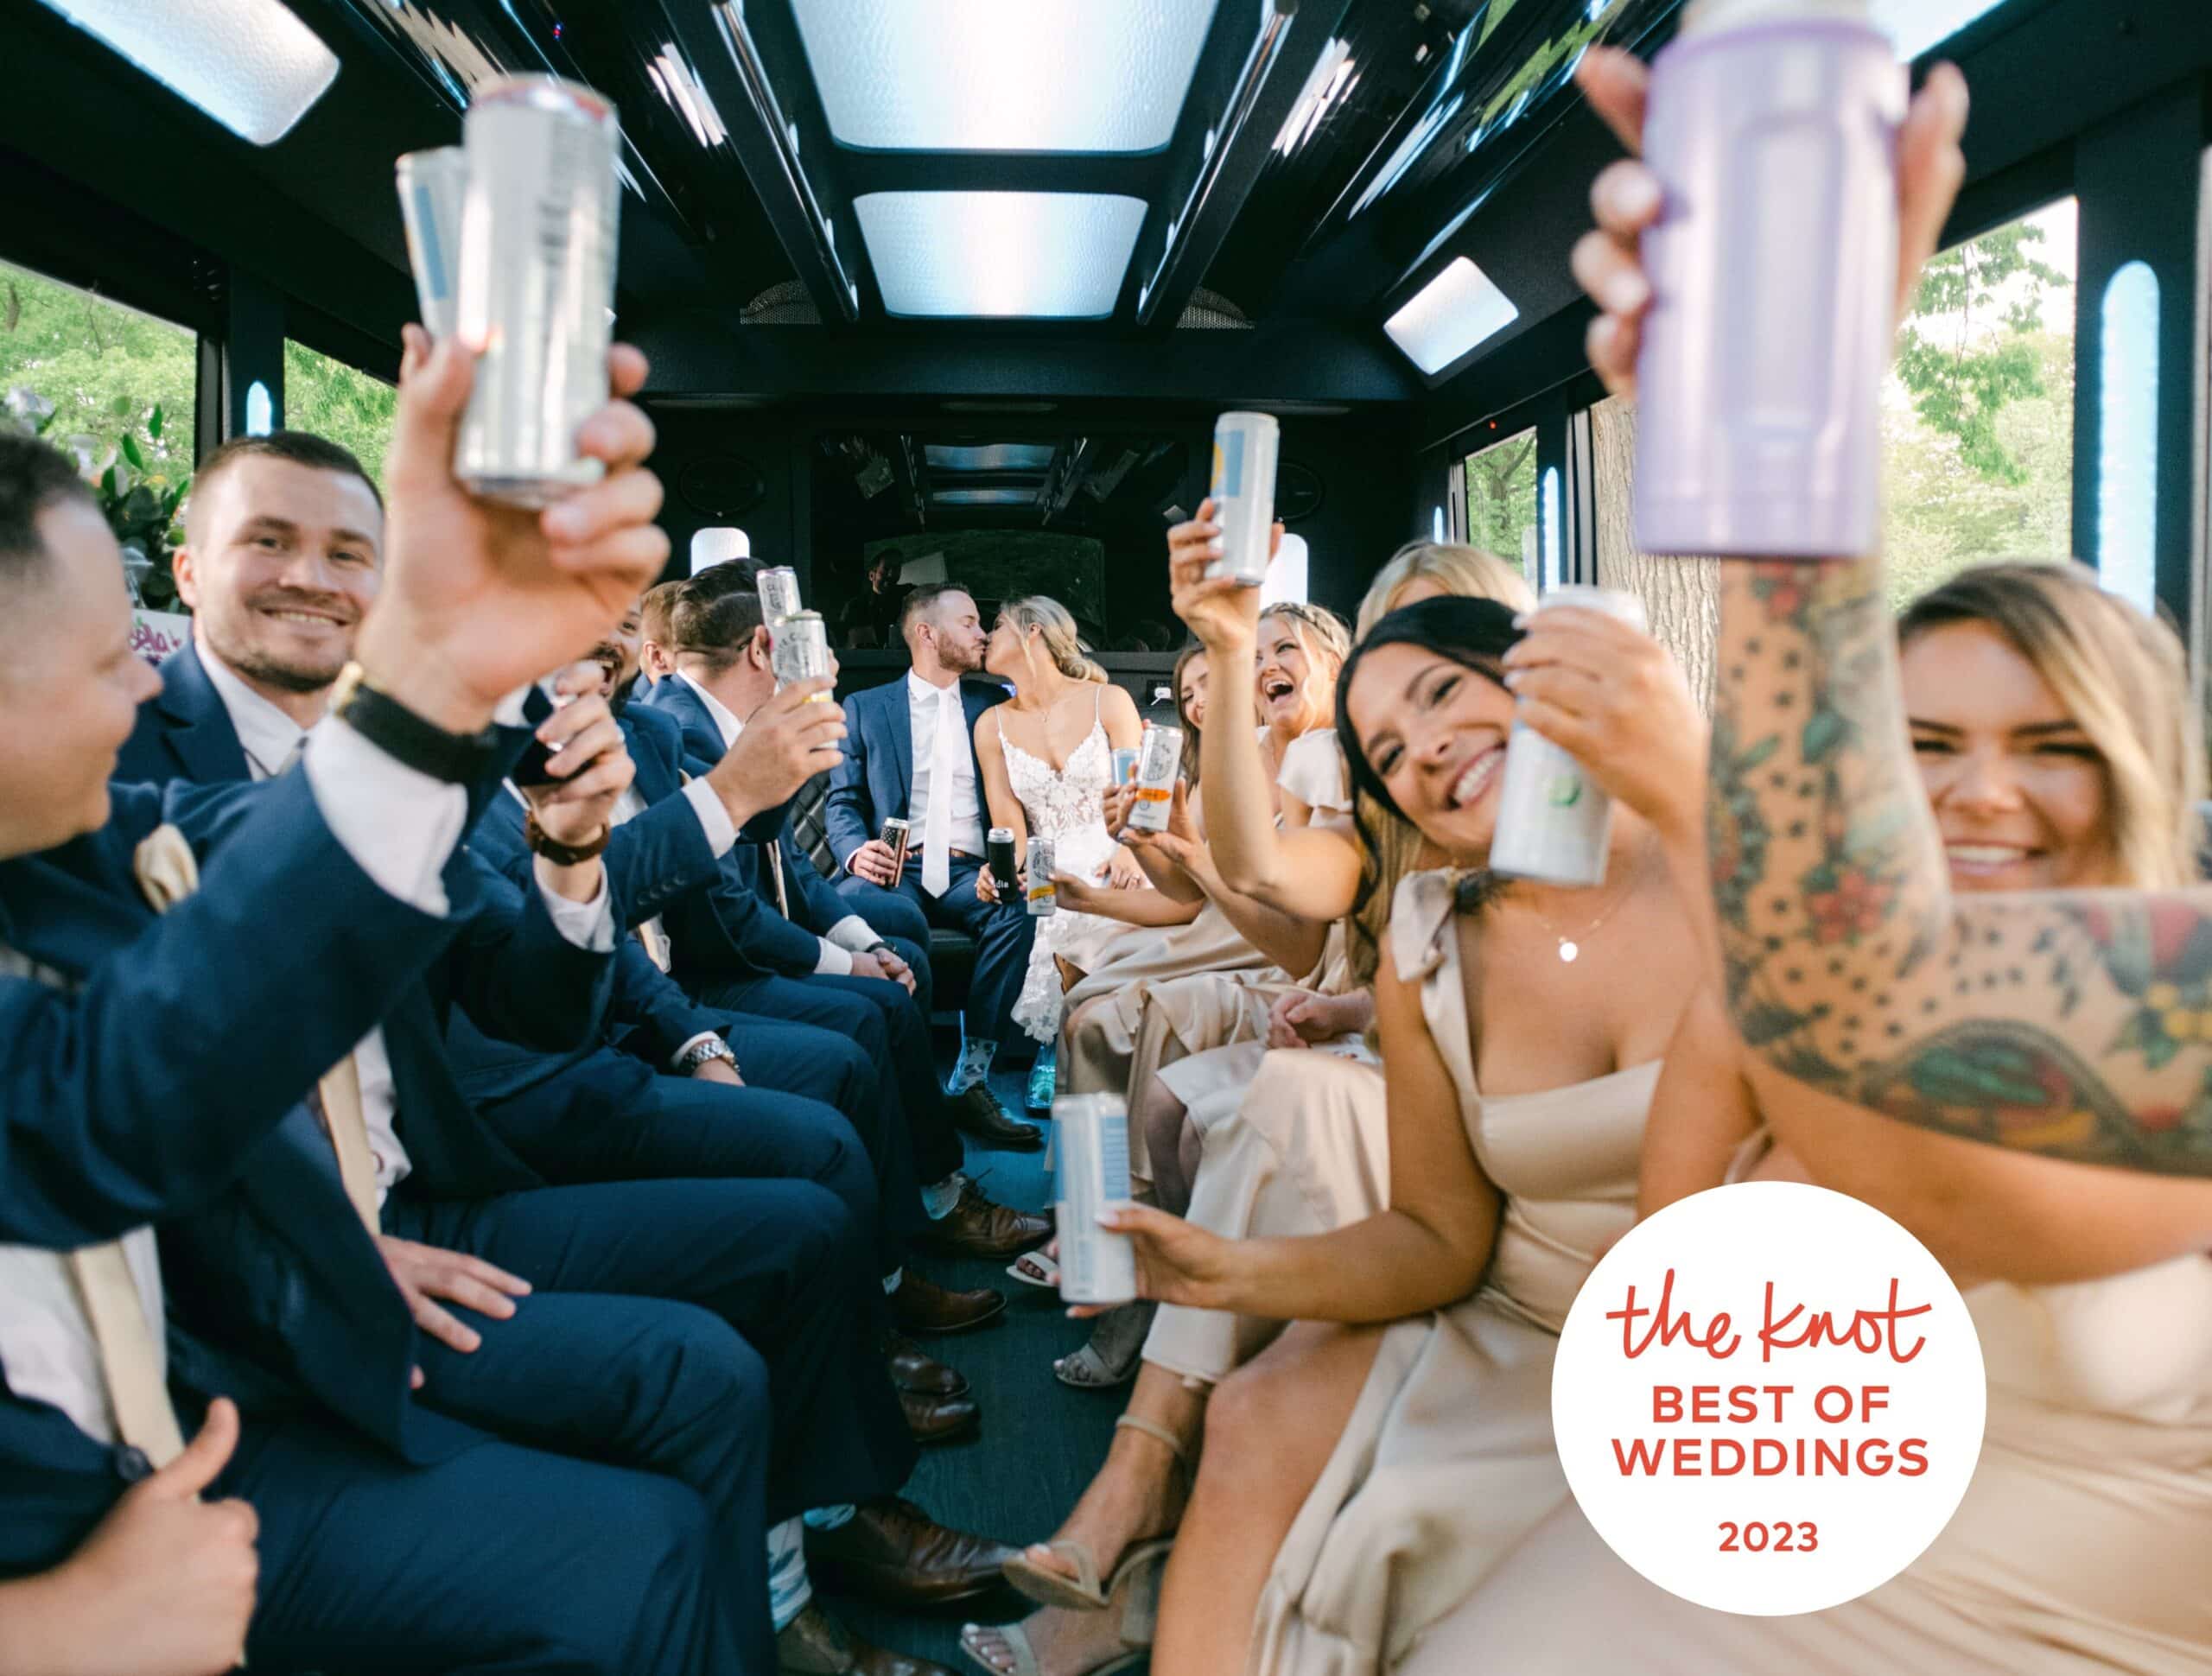 Winner Of The Knot Best Of Weddings 8 Years Platinum Party Bus 1141